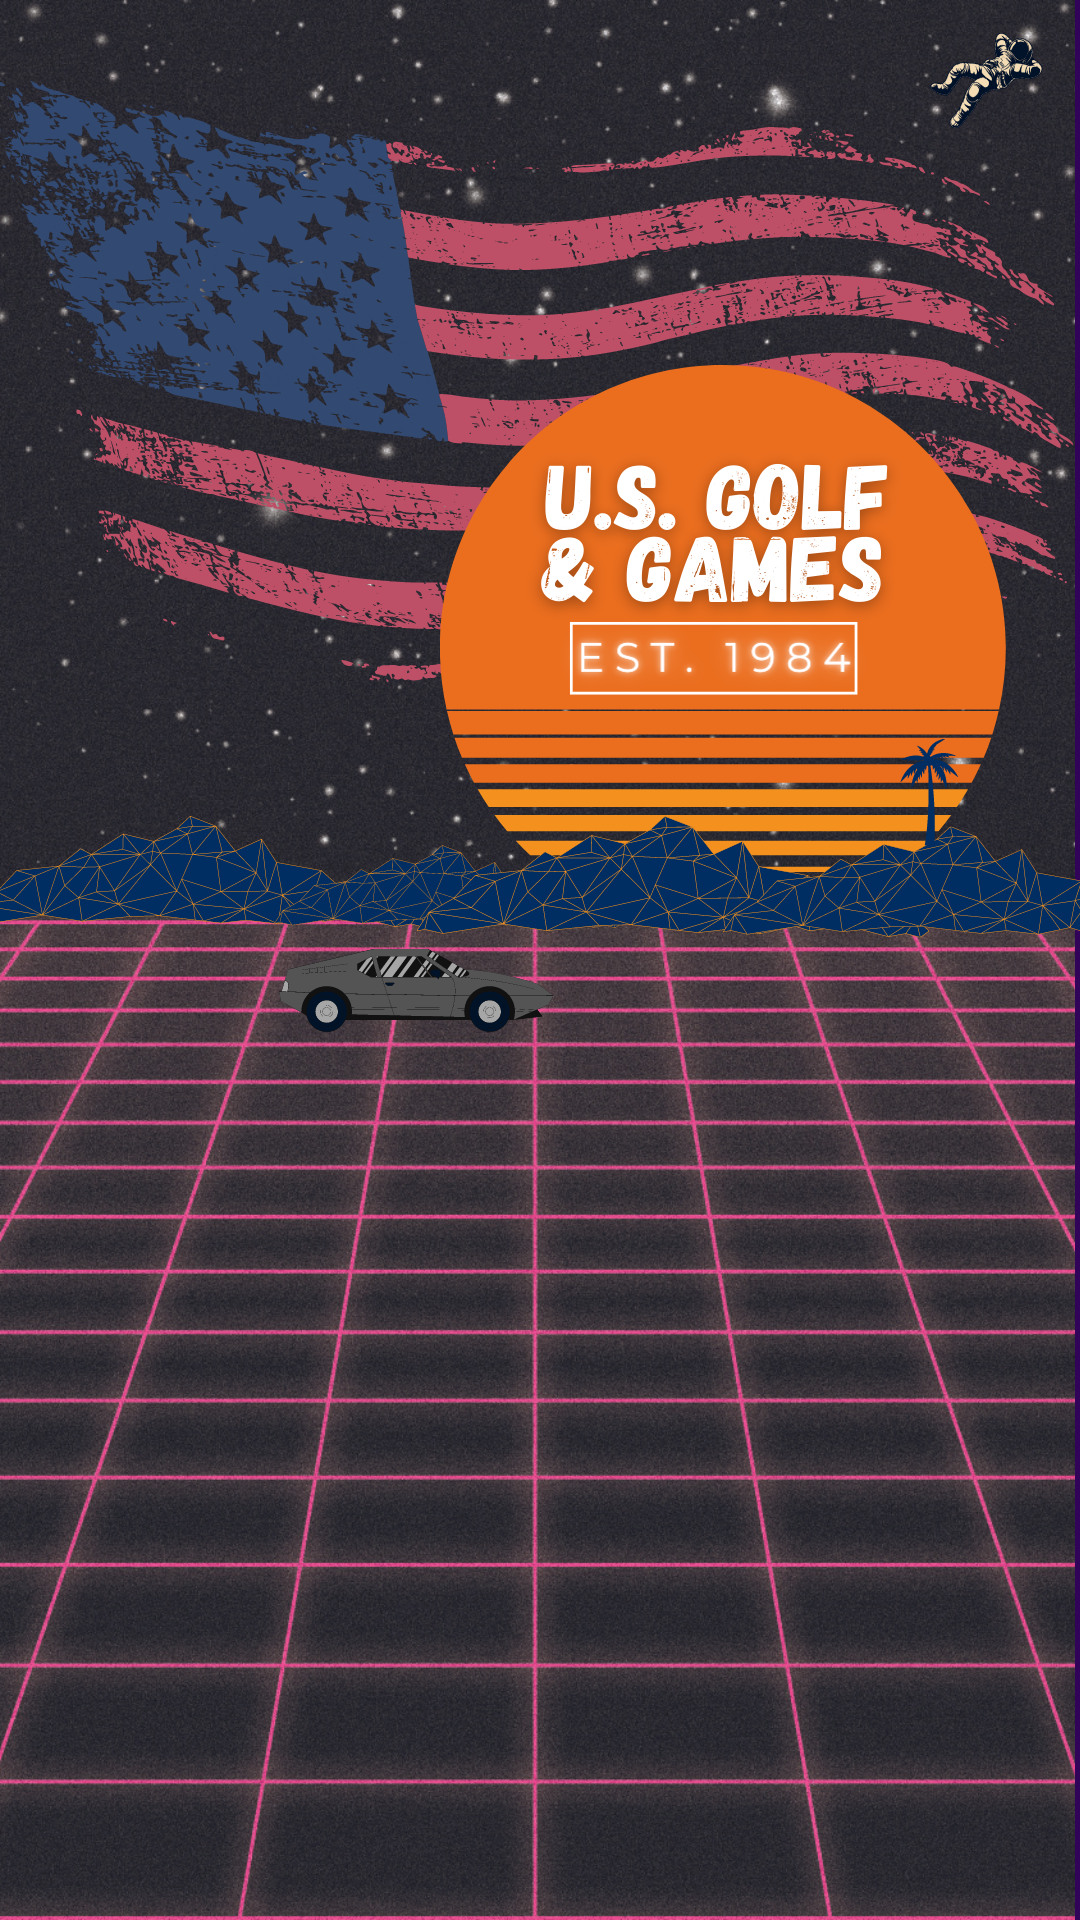 U.S. Golf and Games | Family Fun Center in Houston, TX - Mini Golf, Go Karts, Batting Cages, Arcade Games | Open 7 Days a Week. Experience the excitement today